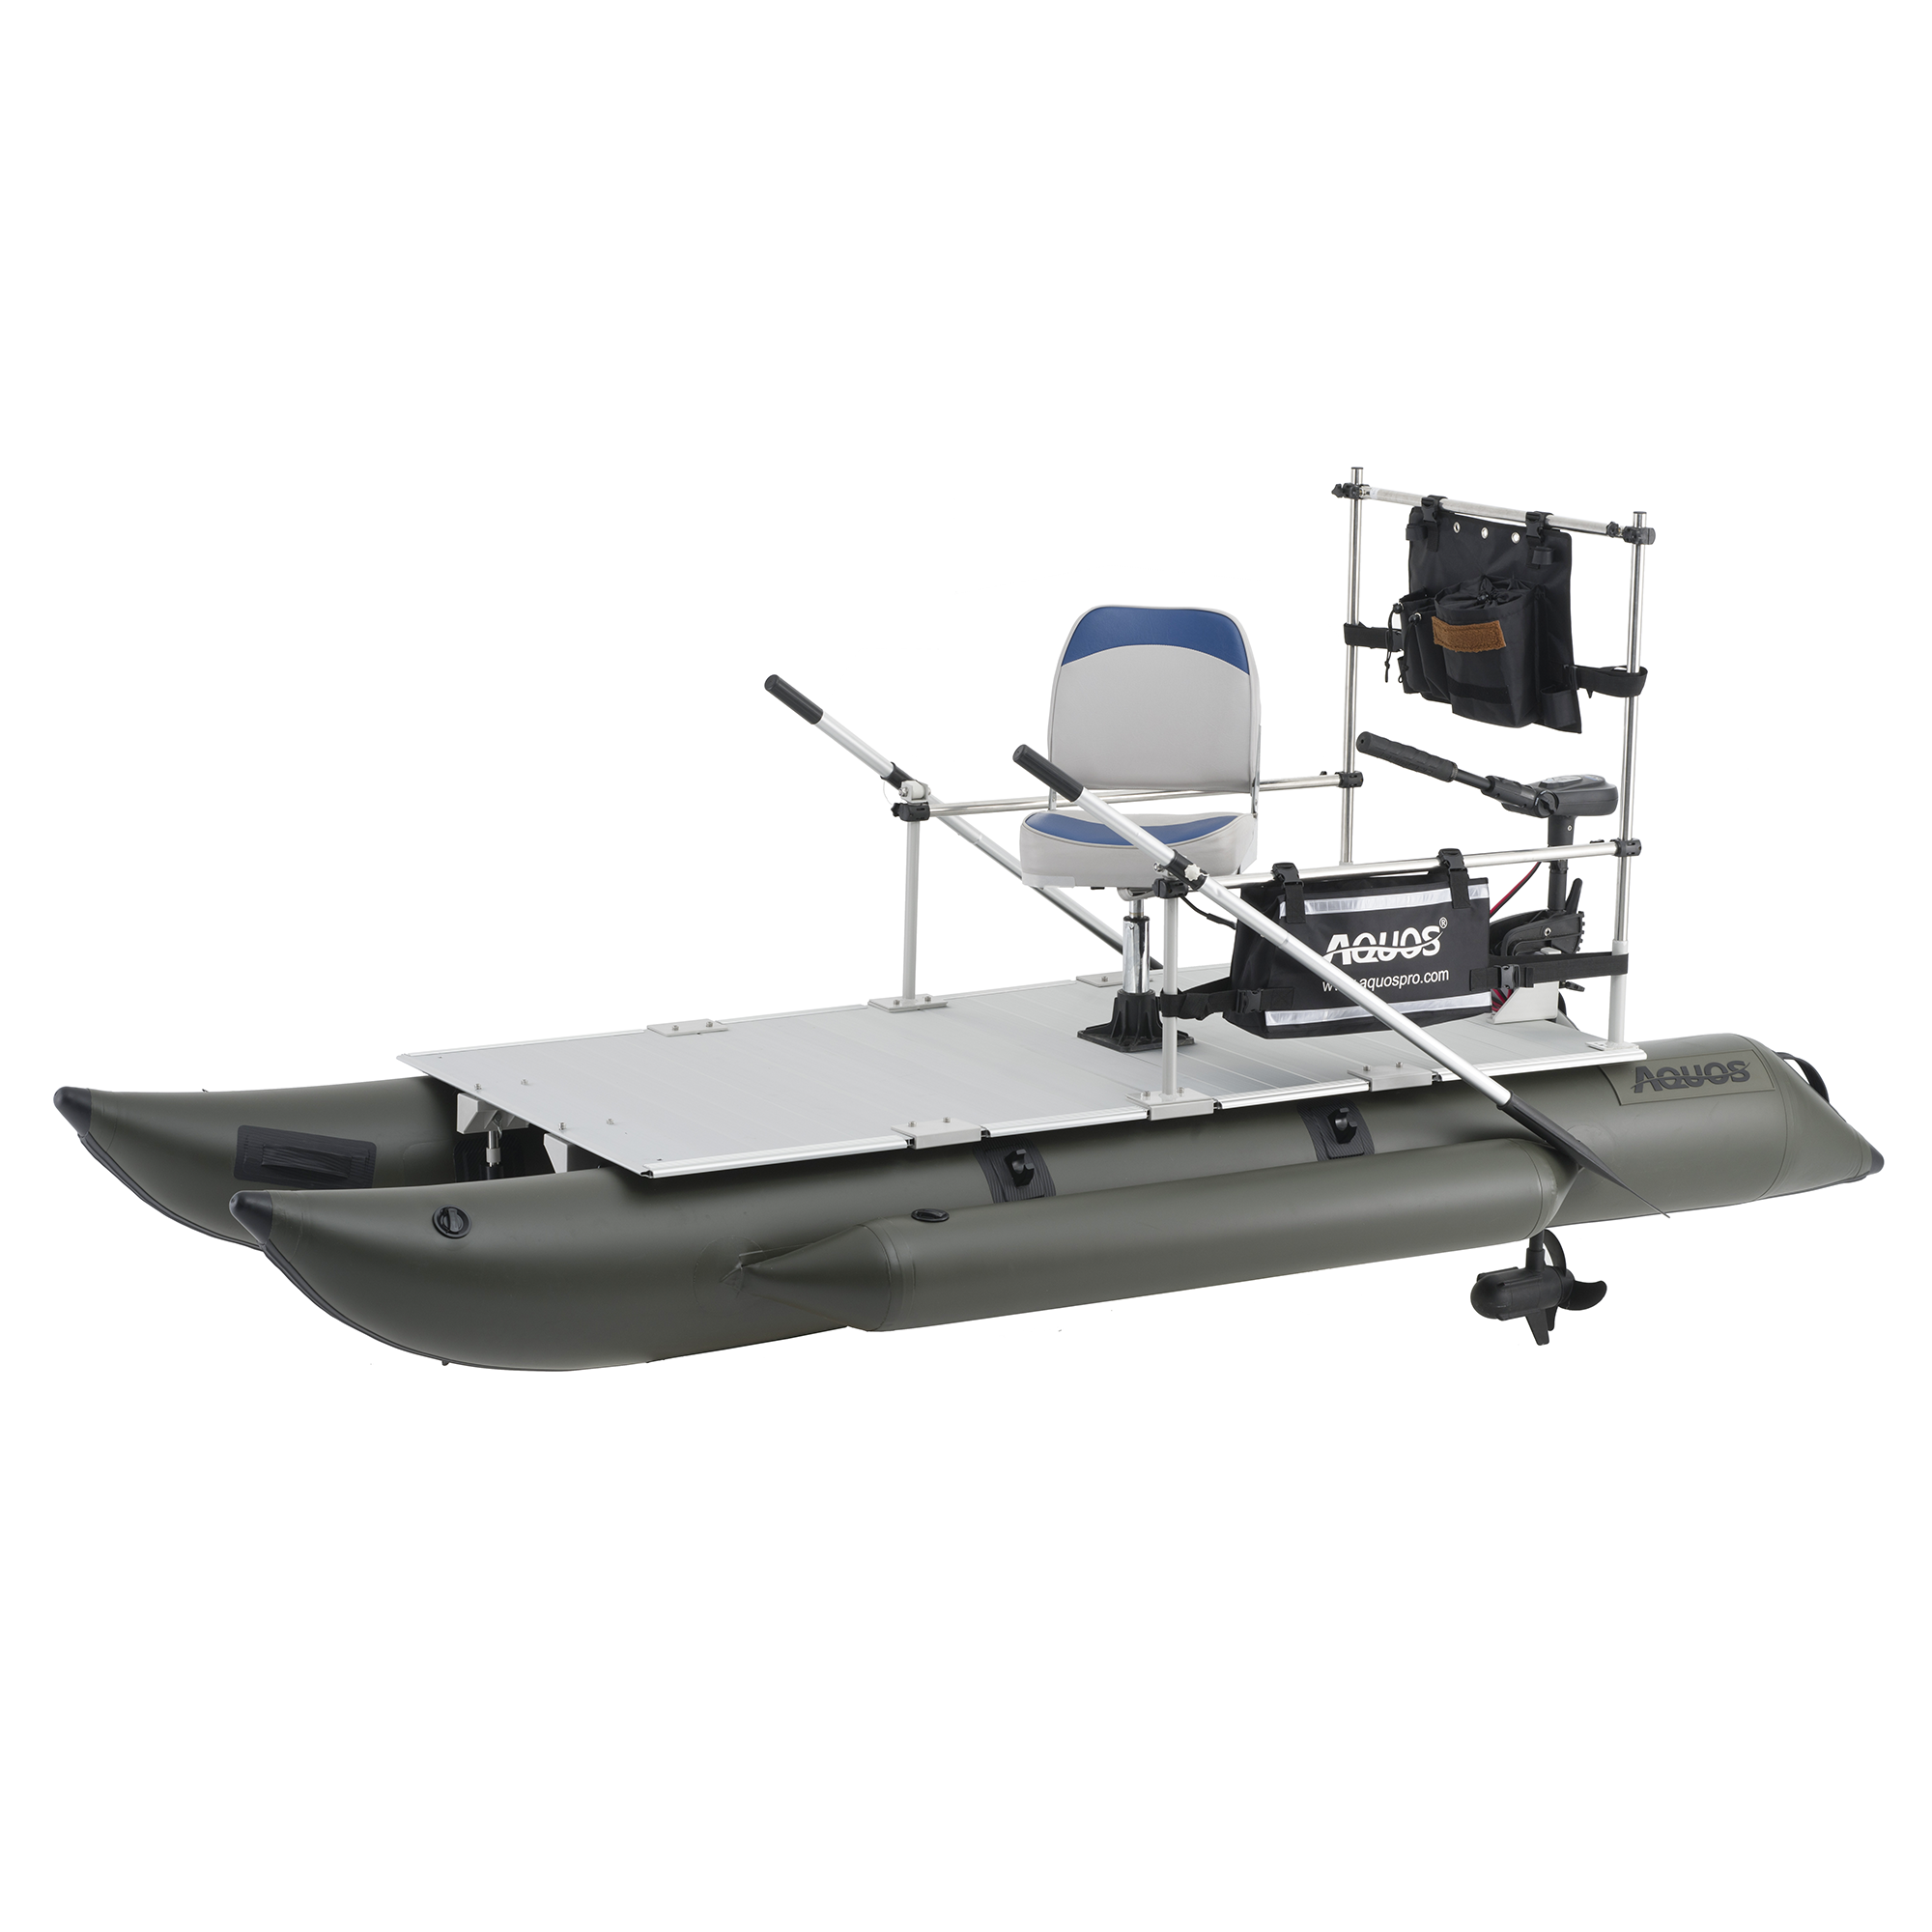 AQUOS New Heavy-Duty for Two Series 11.5 ft Inflatable Pontoon Boat with Haswing 24V 85lbs Transom Hand Control Trolling Motor